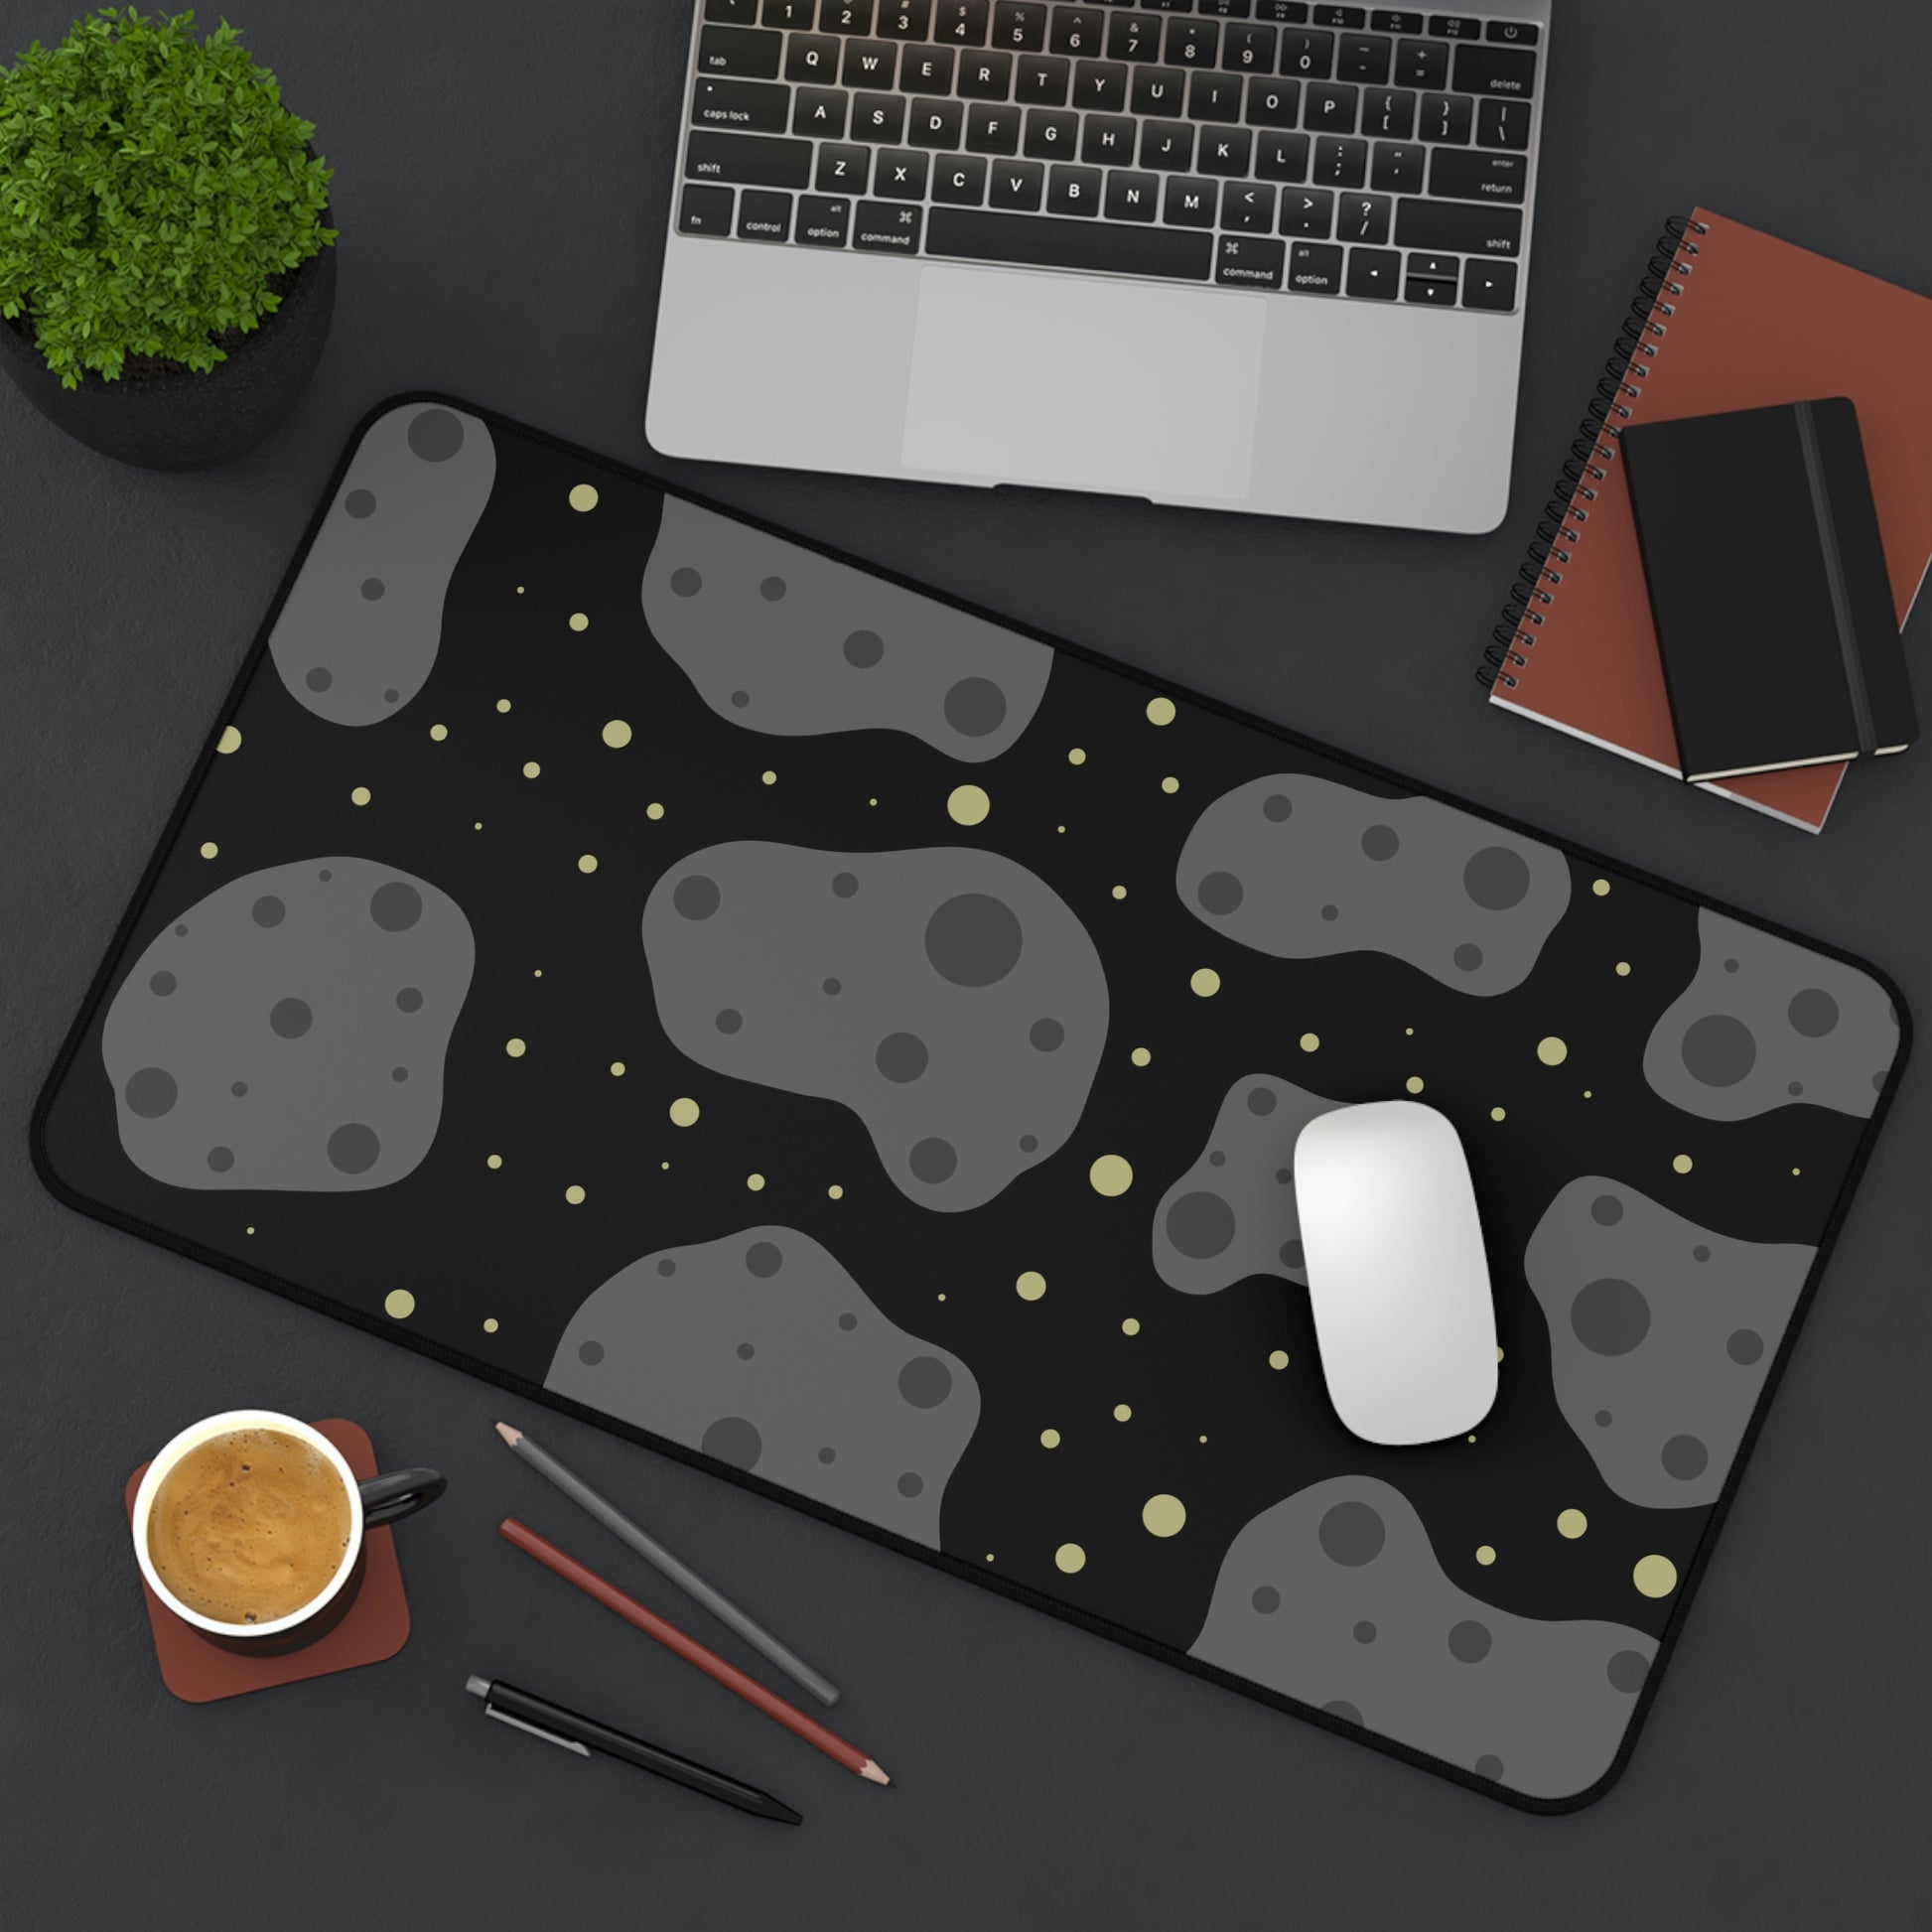 A 12" x 22" desk mat with a black background, gray asteroids, and yellow stars sitting at an angle.